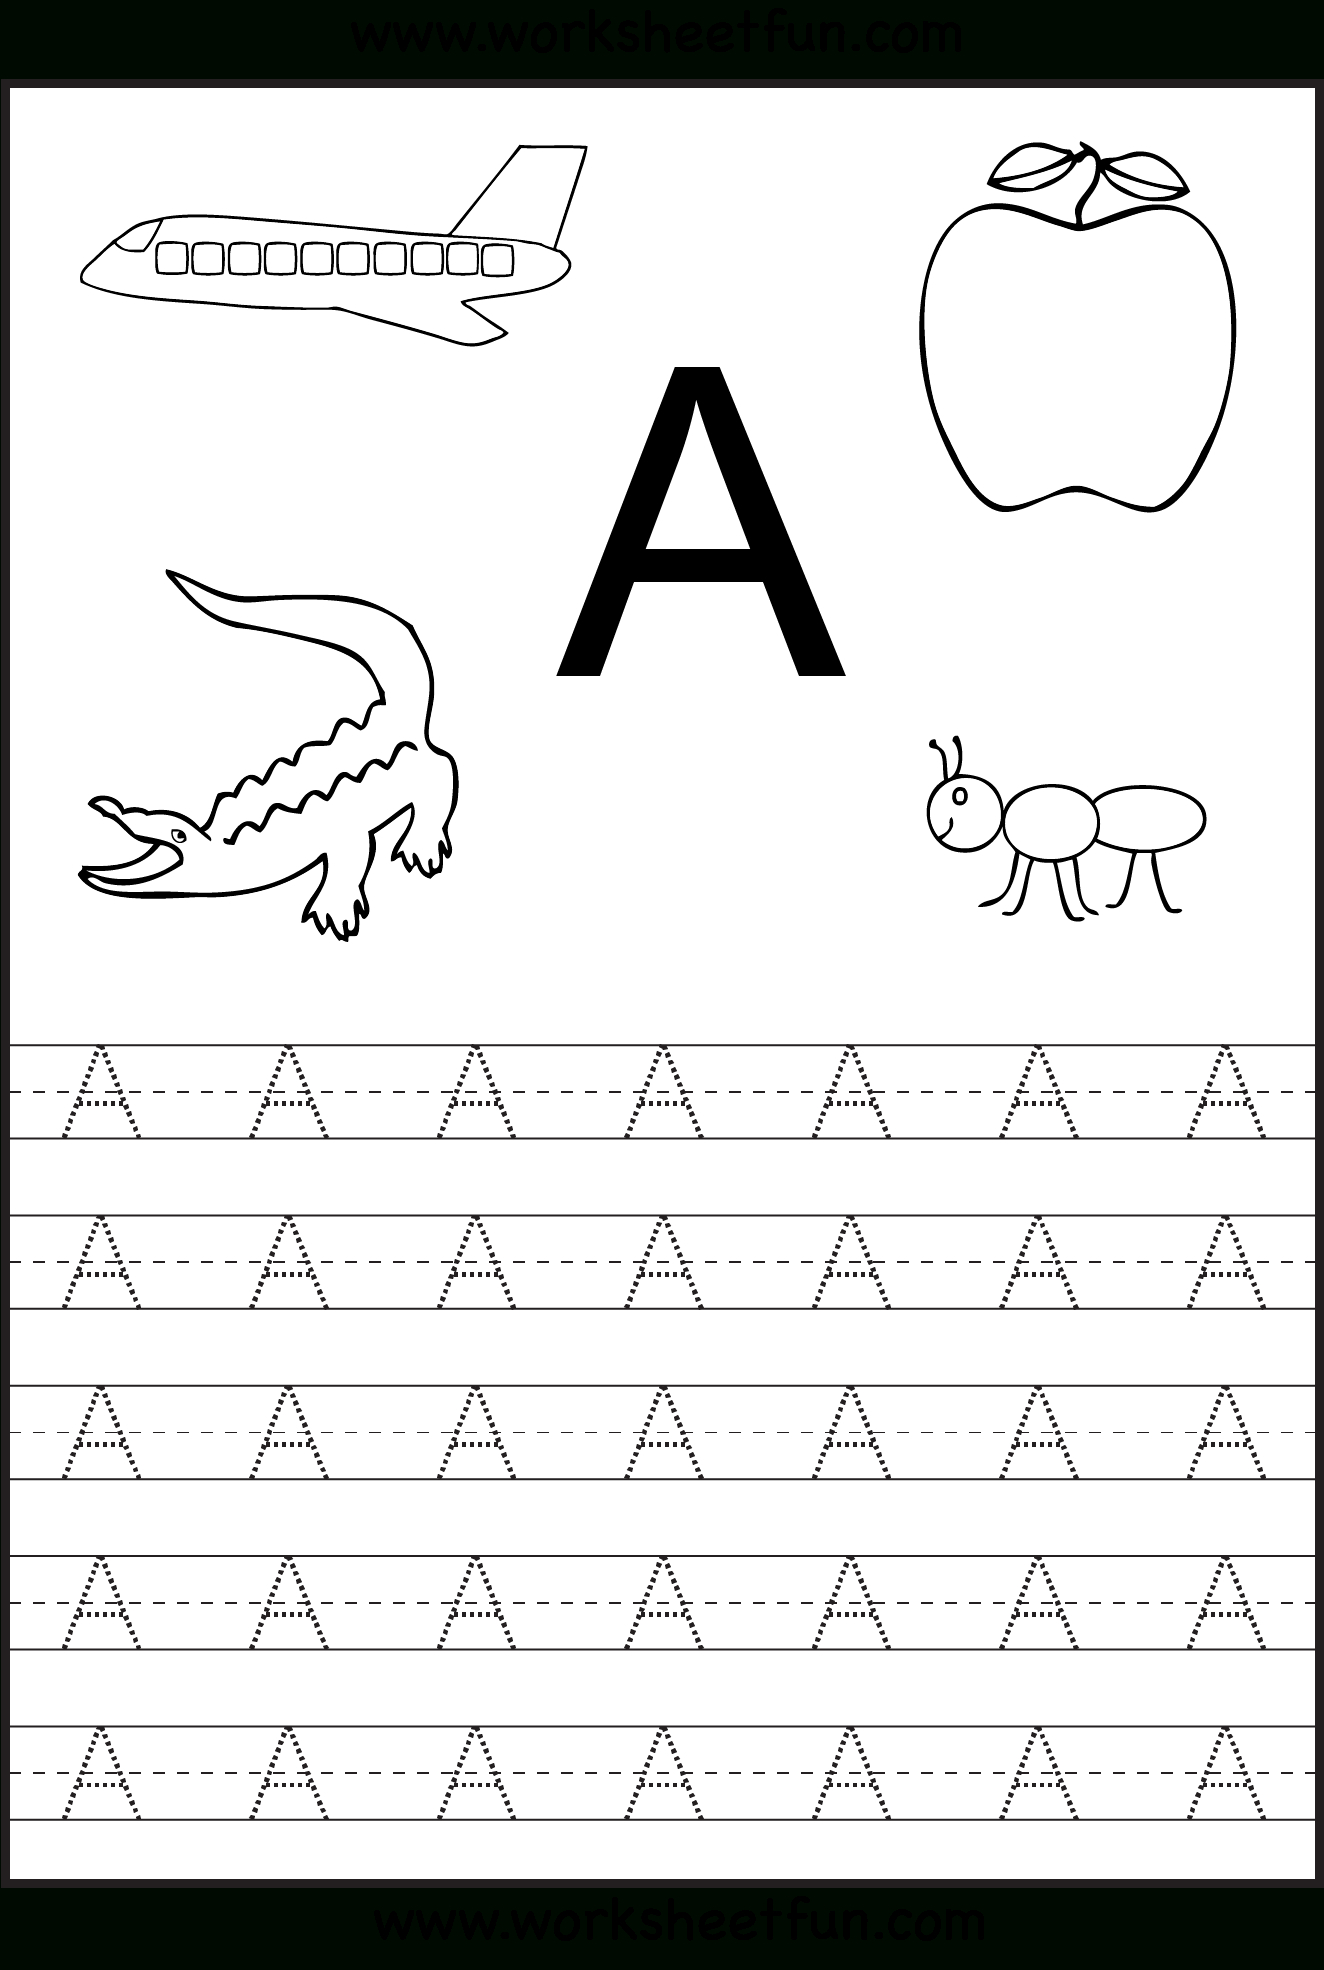 Free Printable Worksheets: Letter Tracing Worksheets For for Tracing Letter S Worksheets For Kindergarten